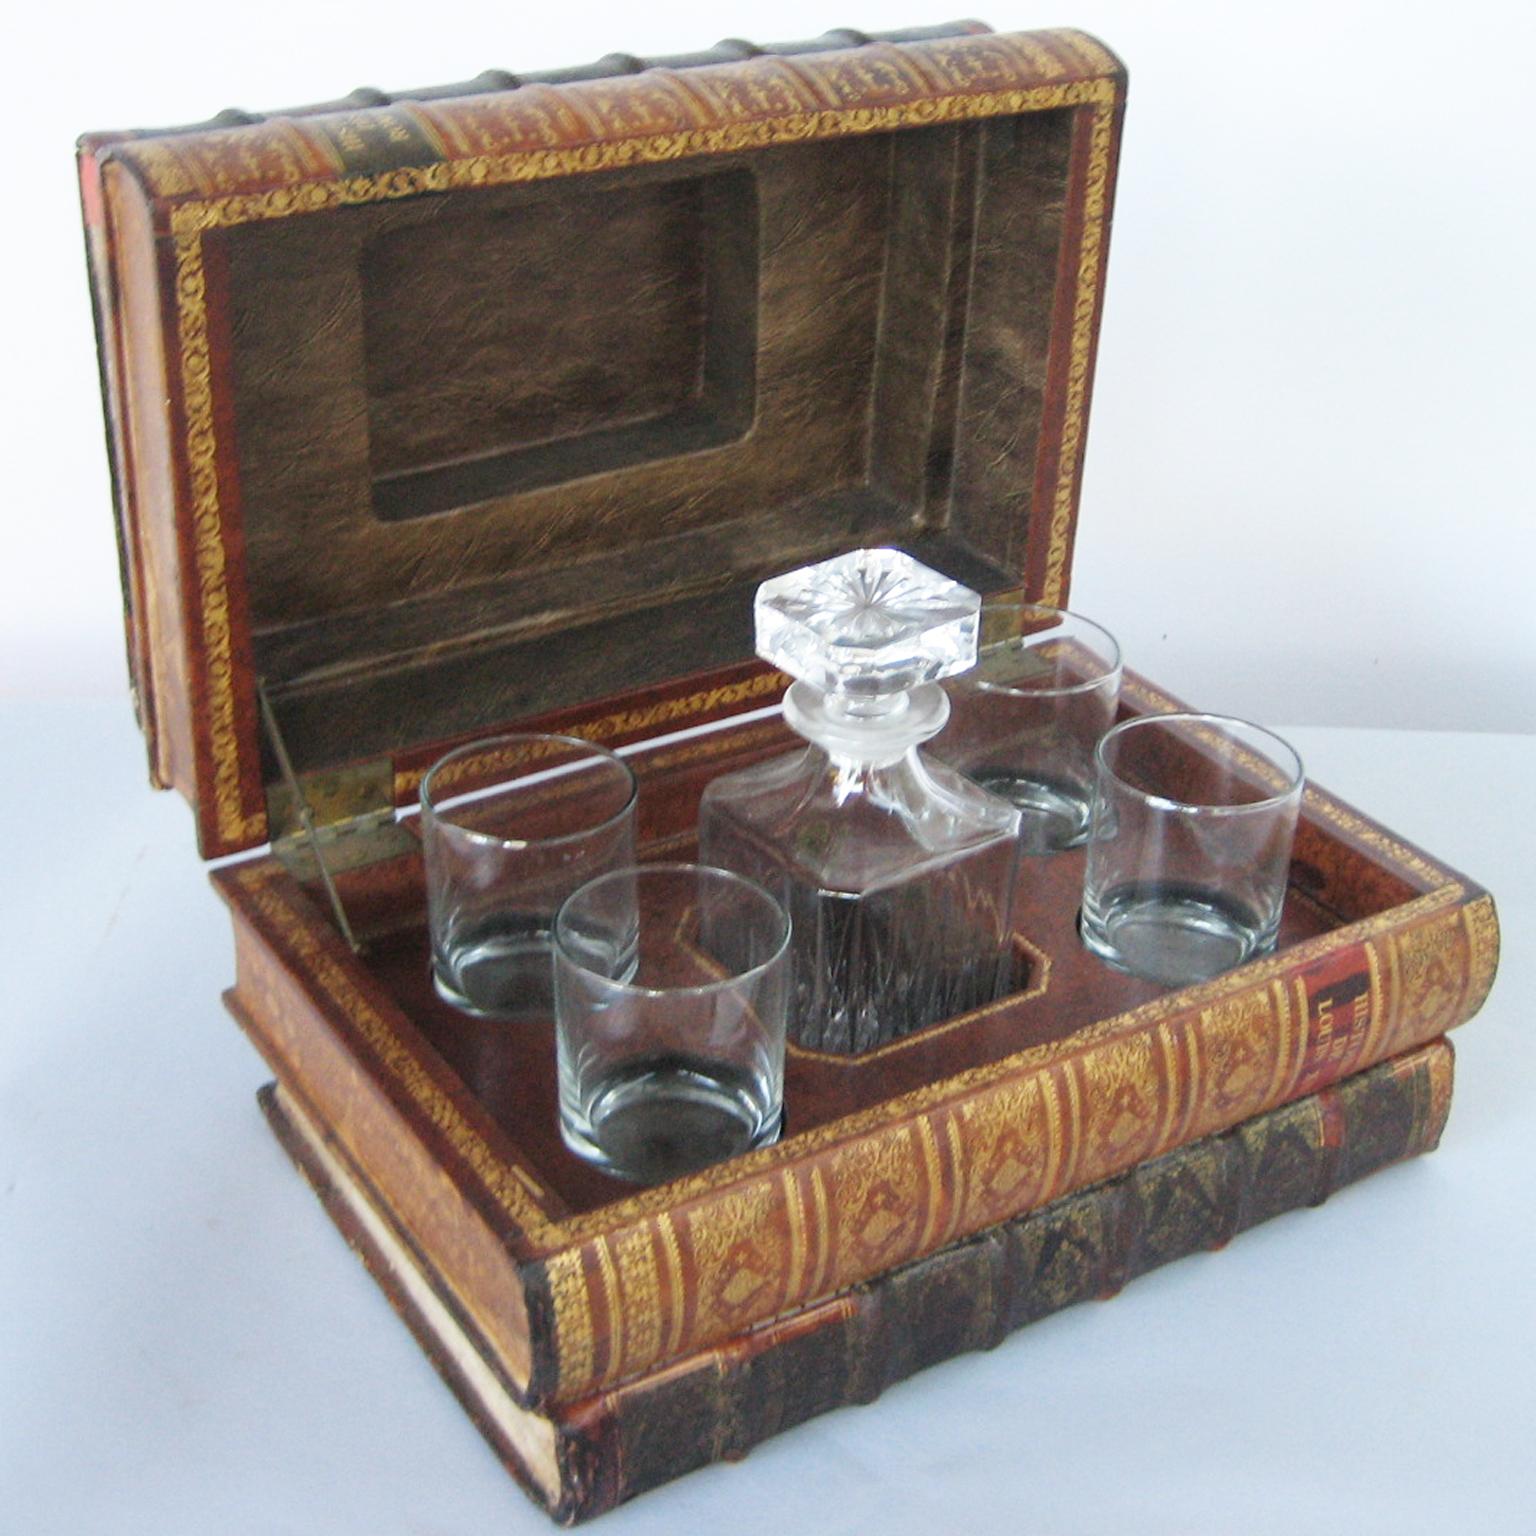 Large tantalus, hidden to appear as a stack of five books, its hinged lid opens to reveal the interior with a compartment dressed with a central liquor bottle and four old fashion glass tumblers. 

Can be displayed open or closed, and is a great